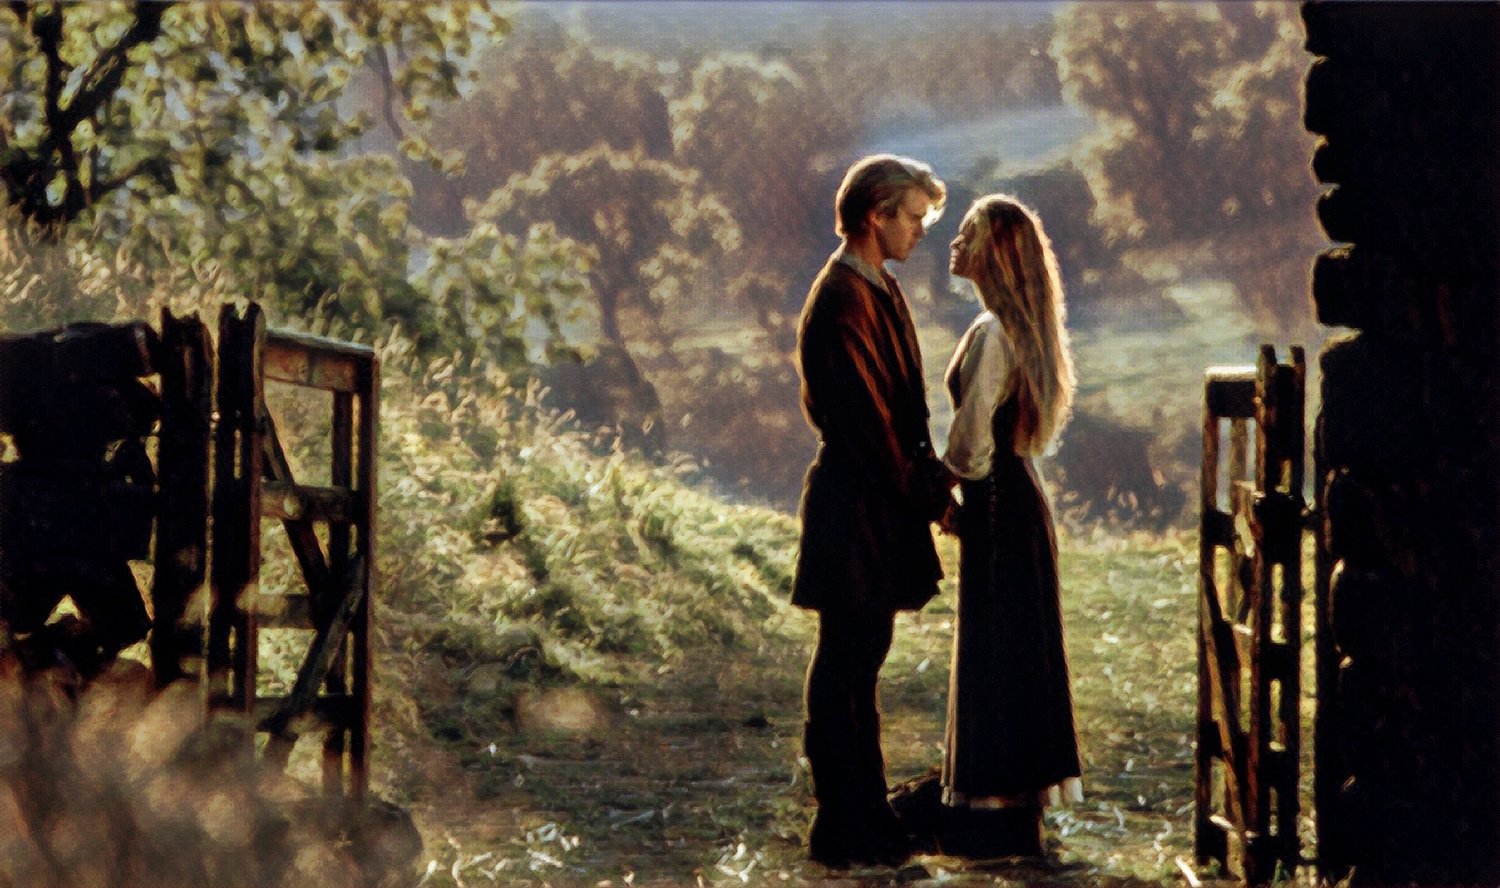 The Princess Bride, minutes 44 to 46